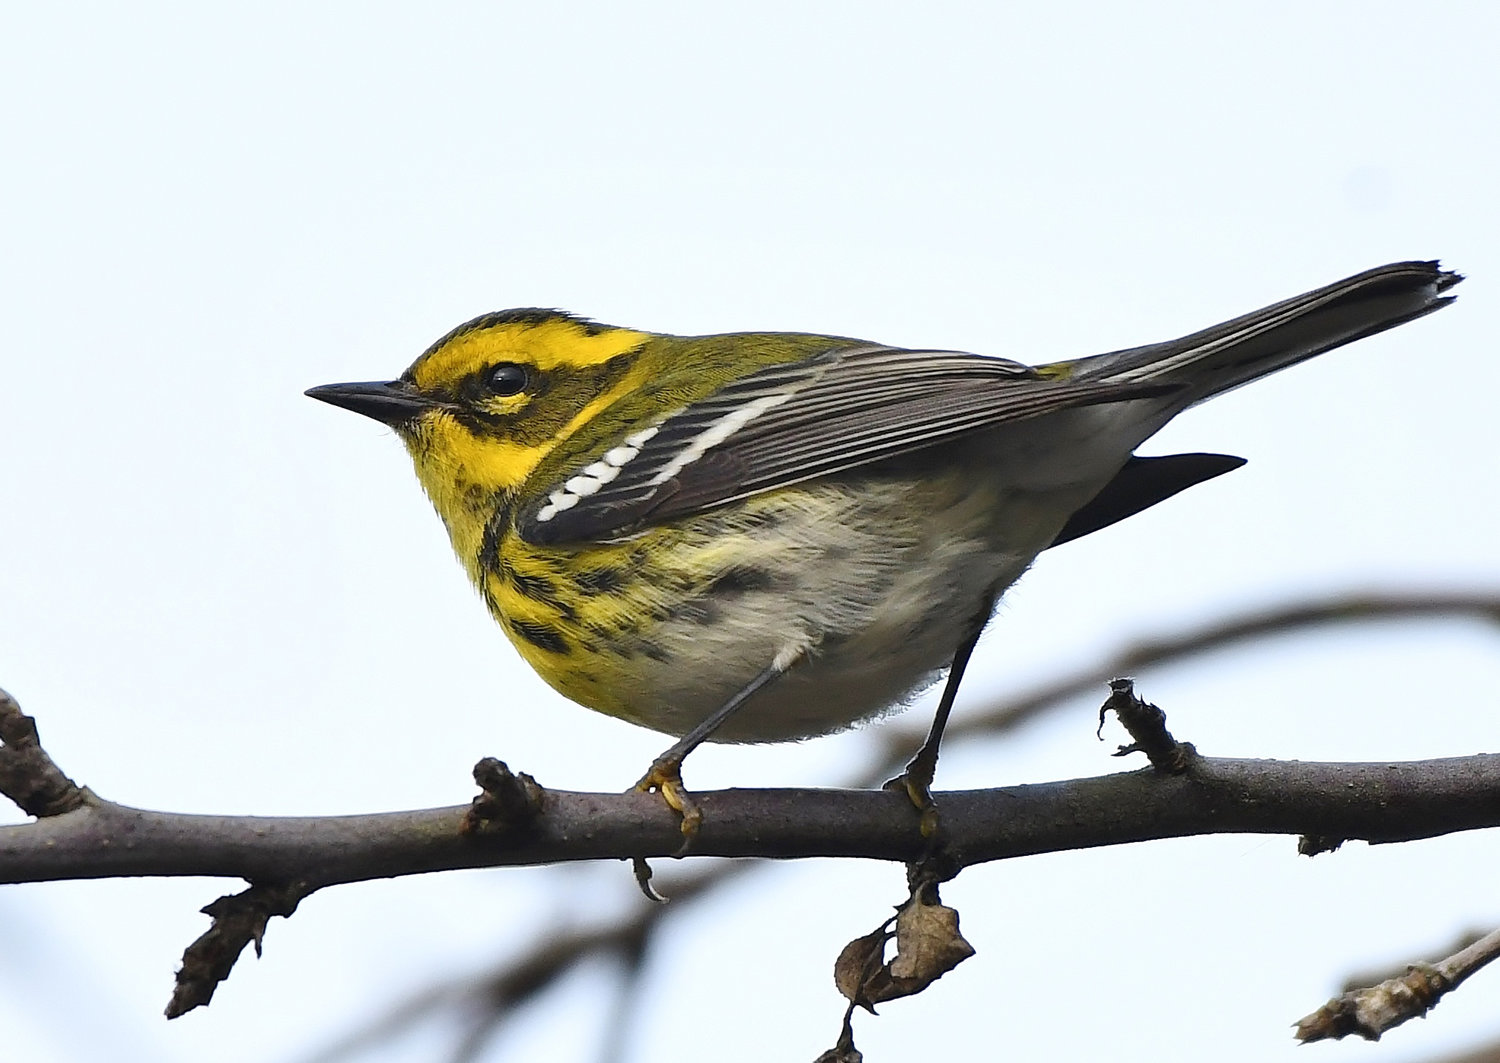 A Townsend’s Warbler is photographed during the 2019 Lewis County Bird Count.